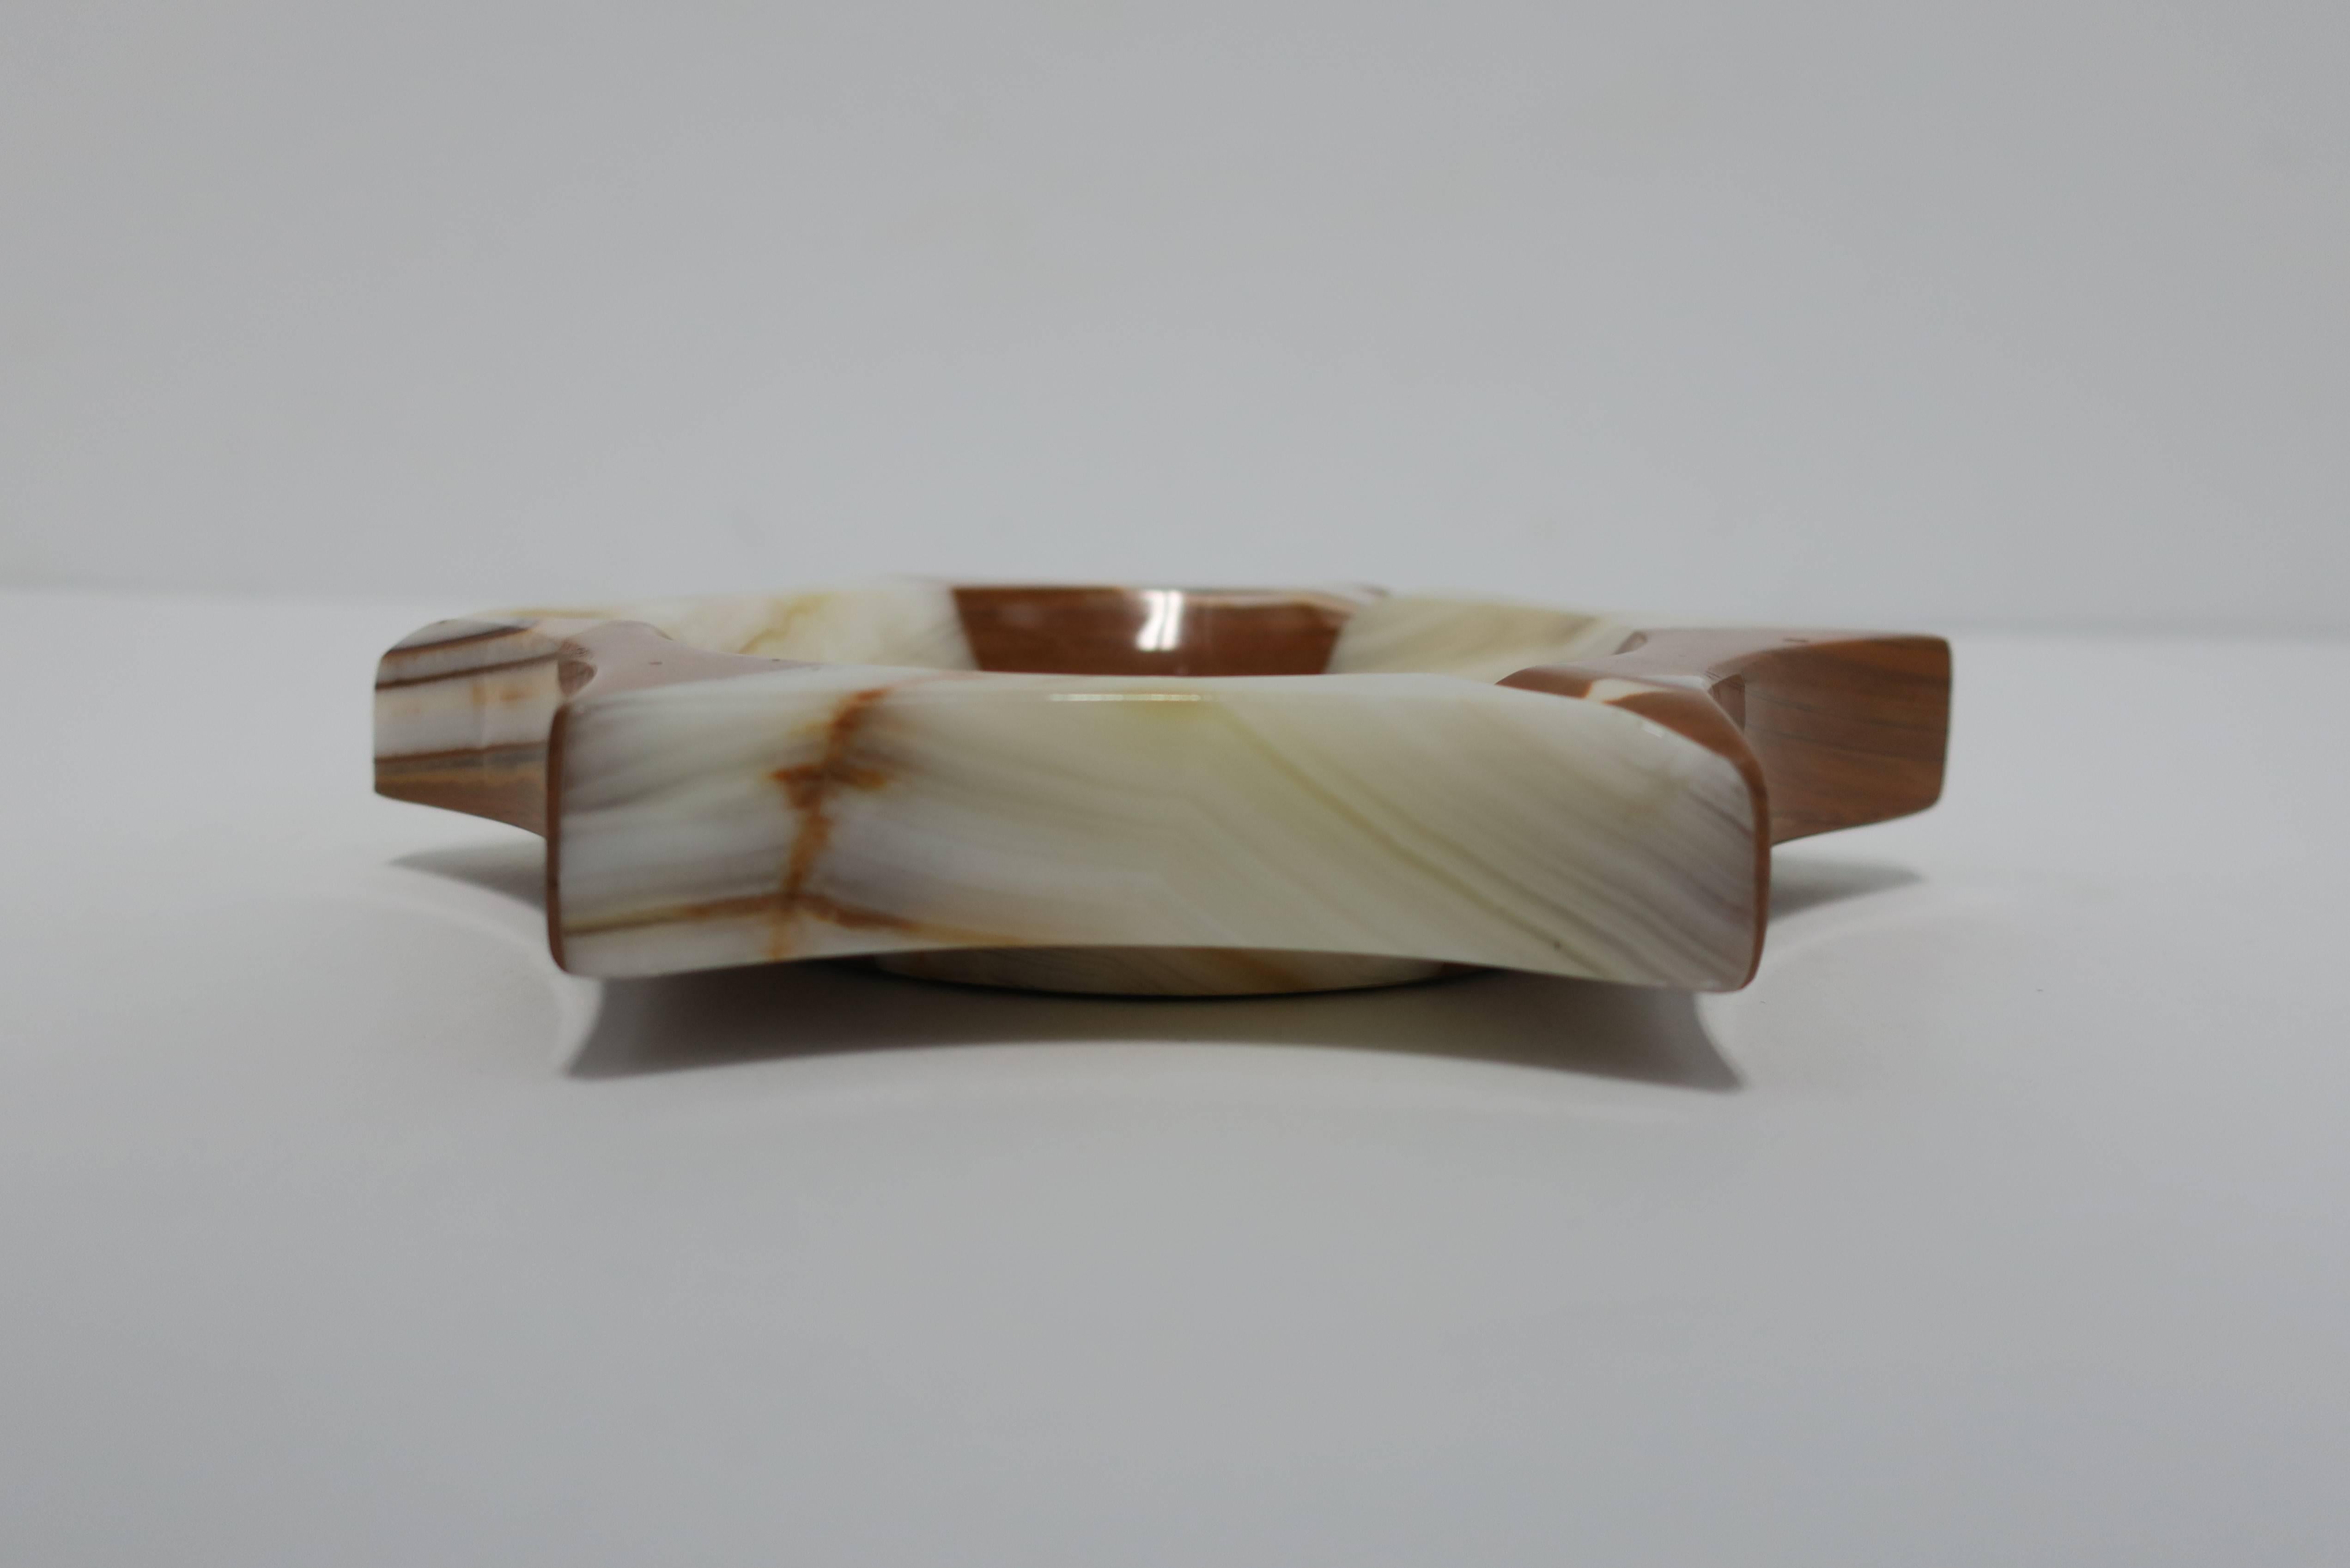 Midcentury Modern Onyx Marble Ashtray or Catch-All Vessel or Bowl 3